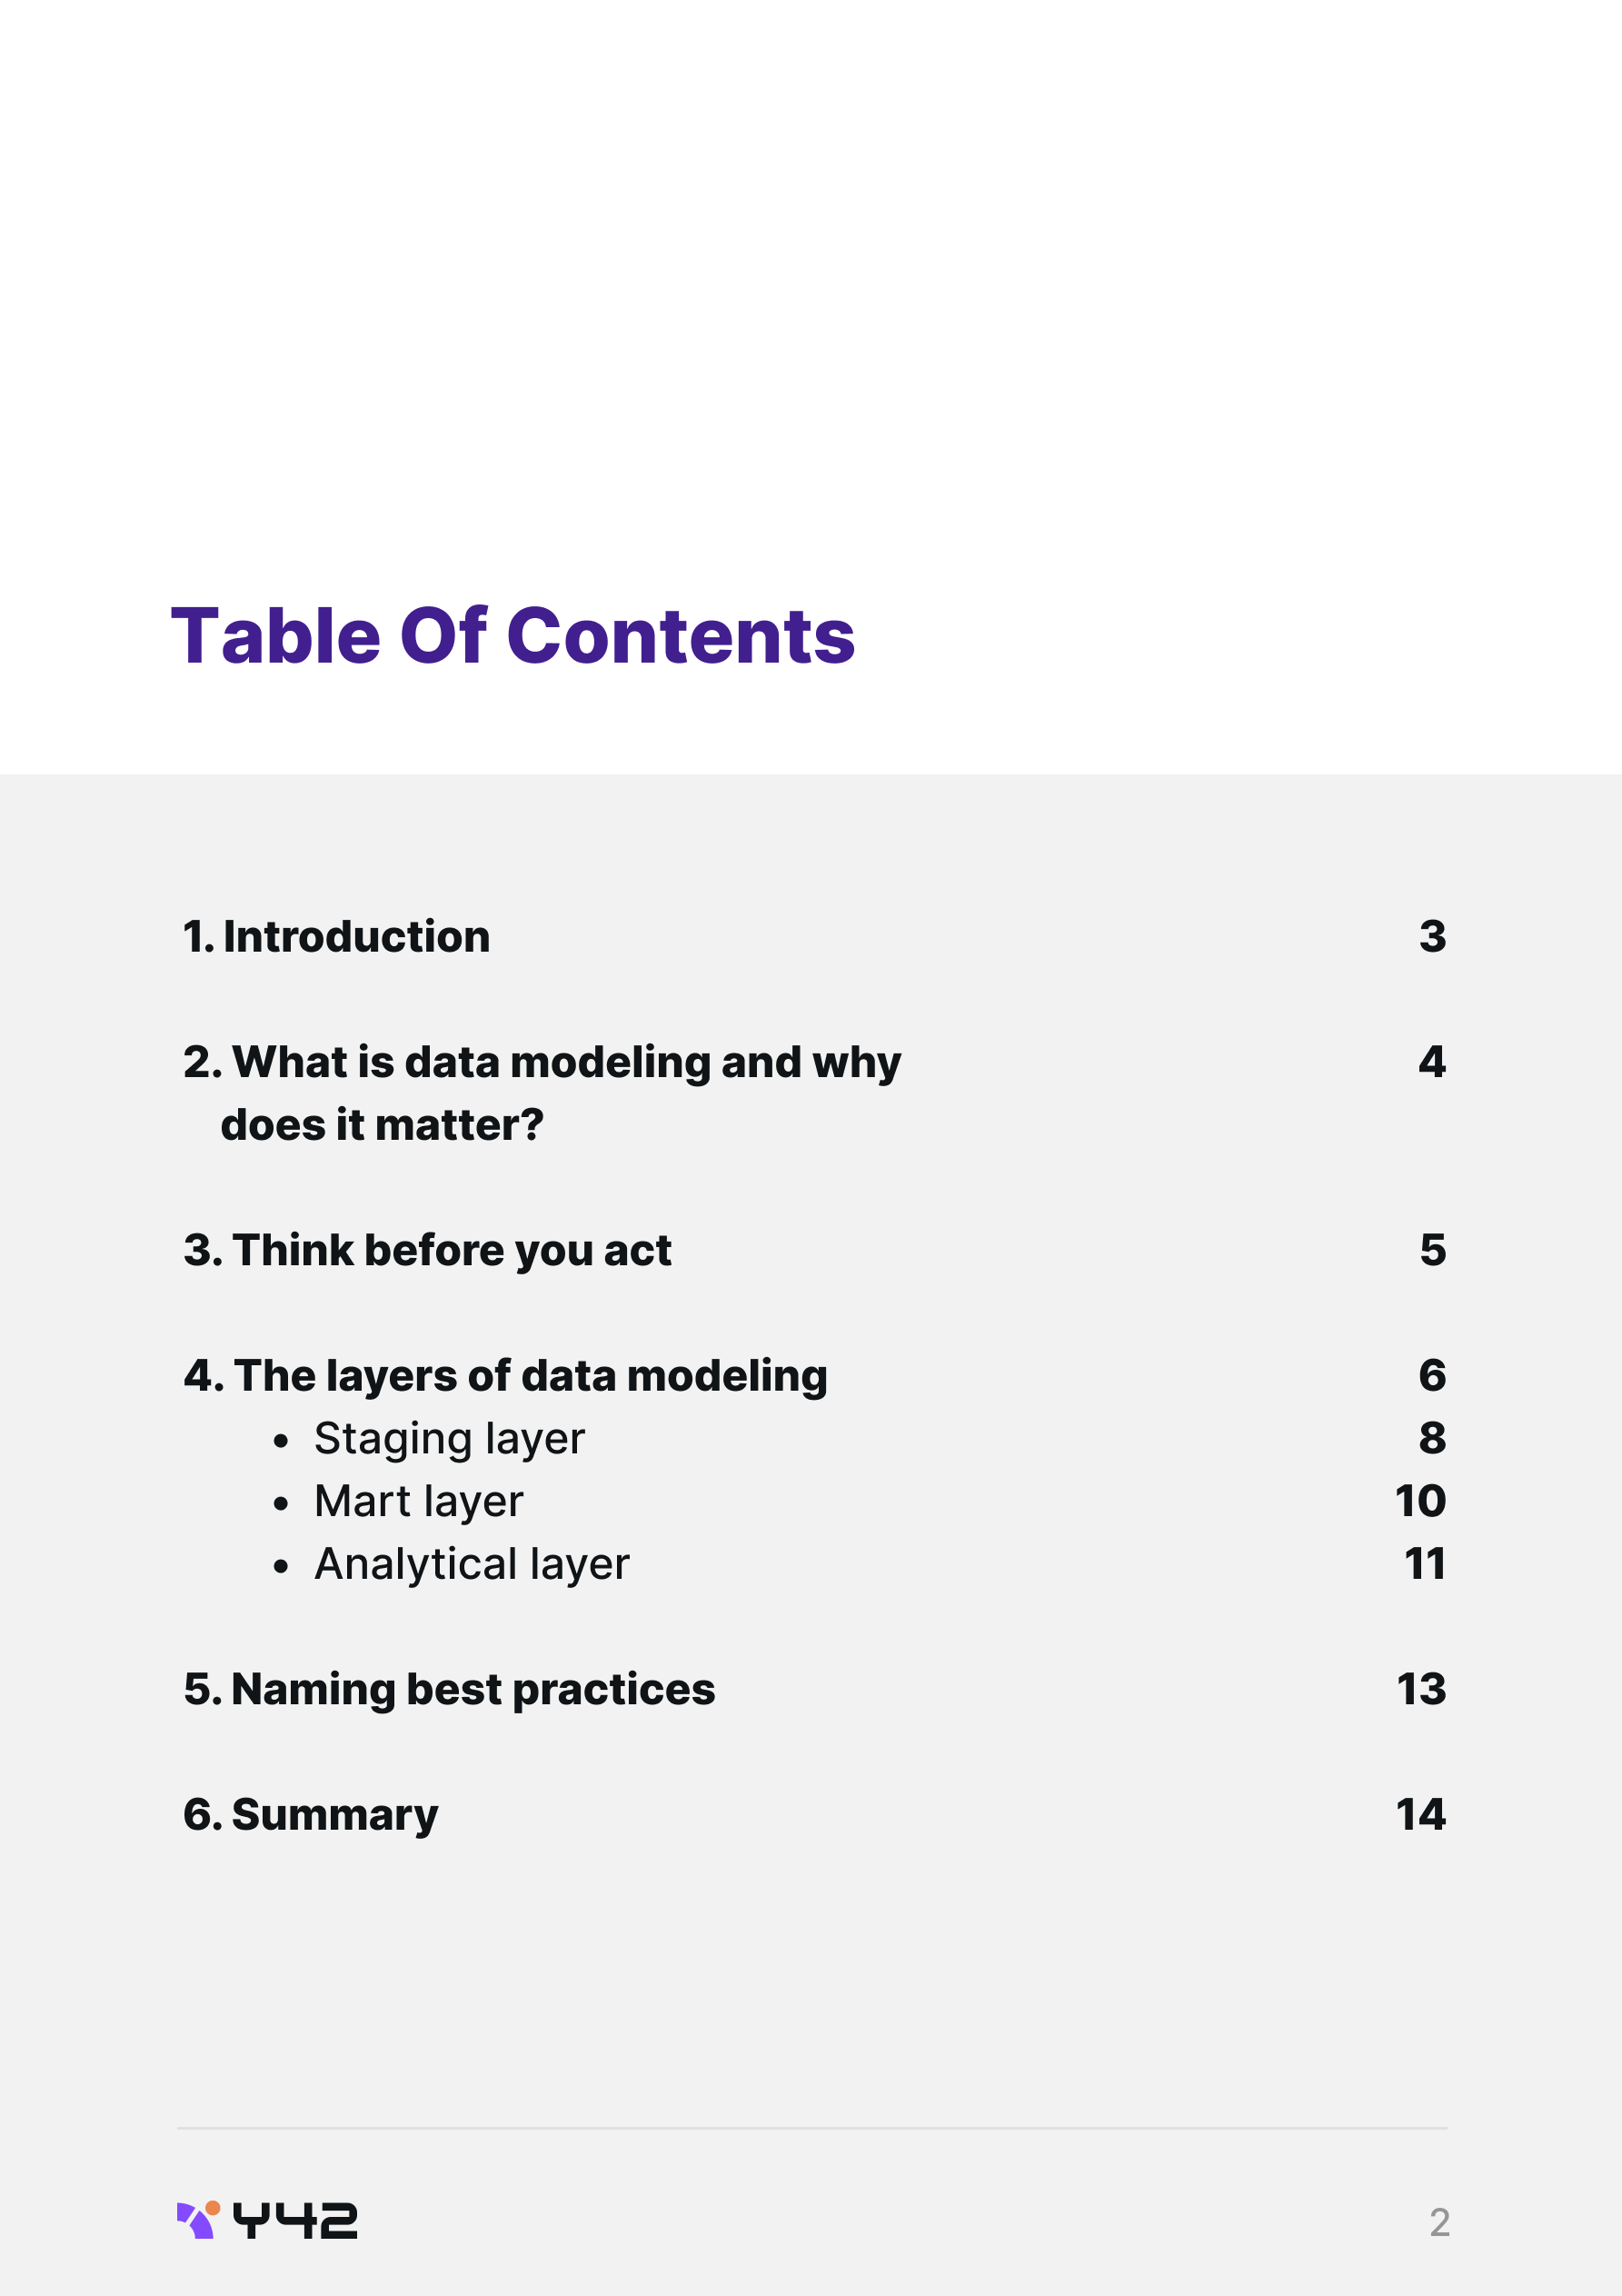 Table of contents - Data modeling guide